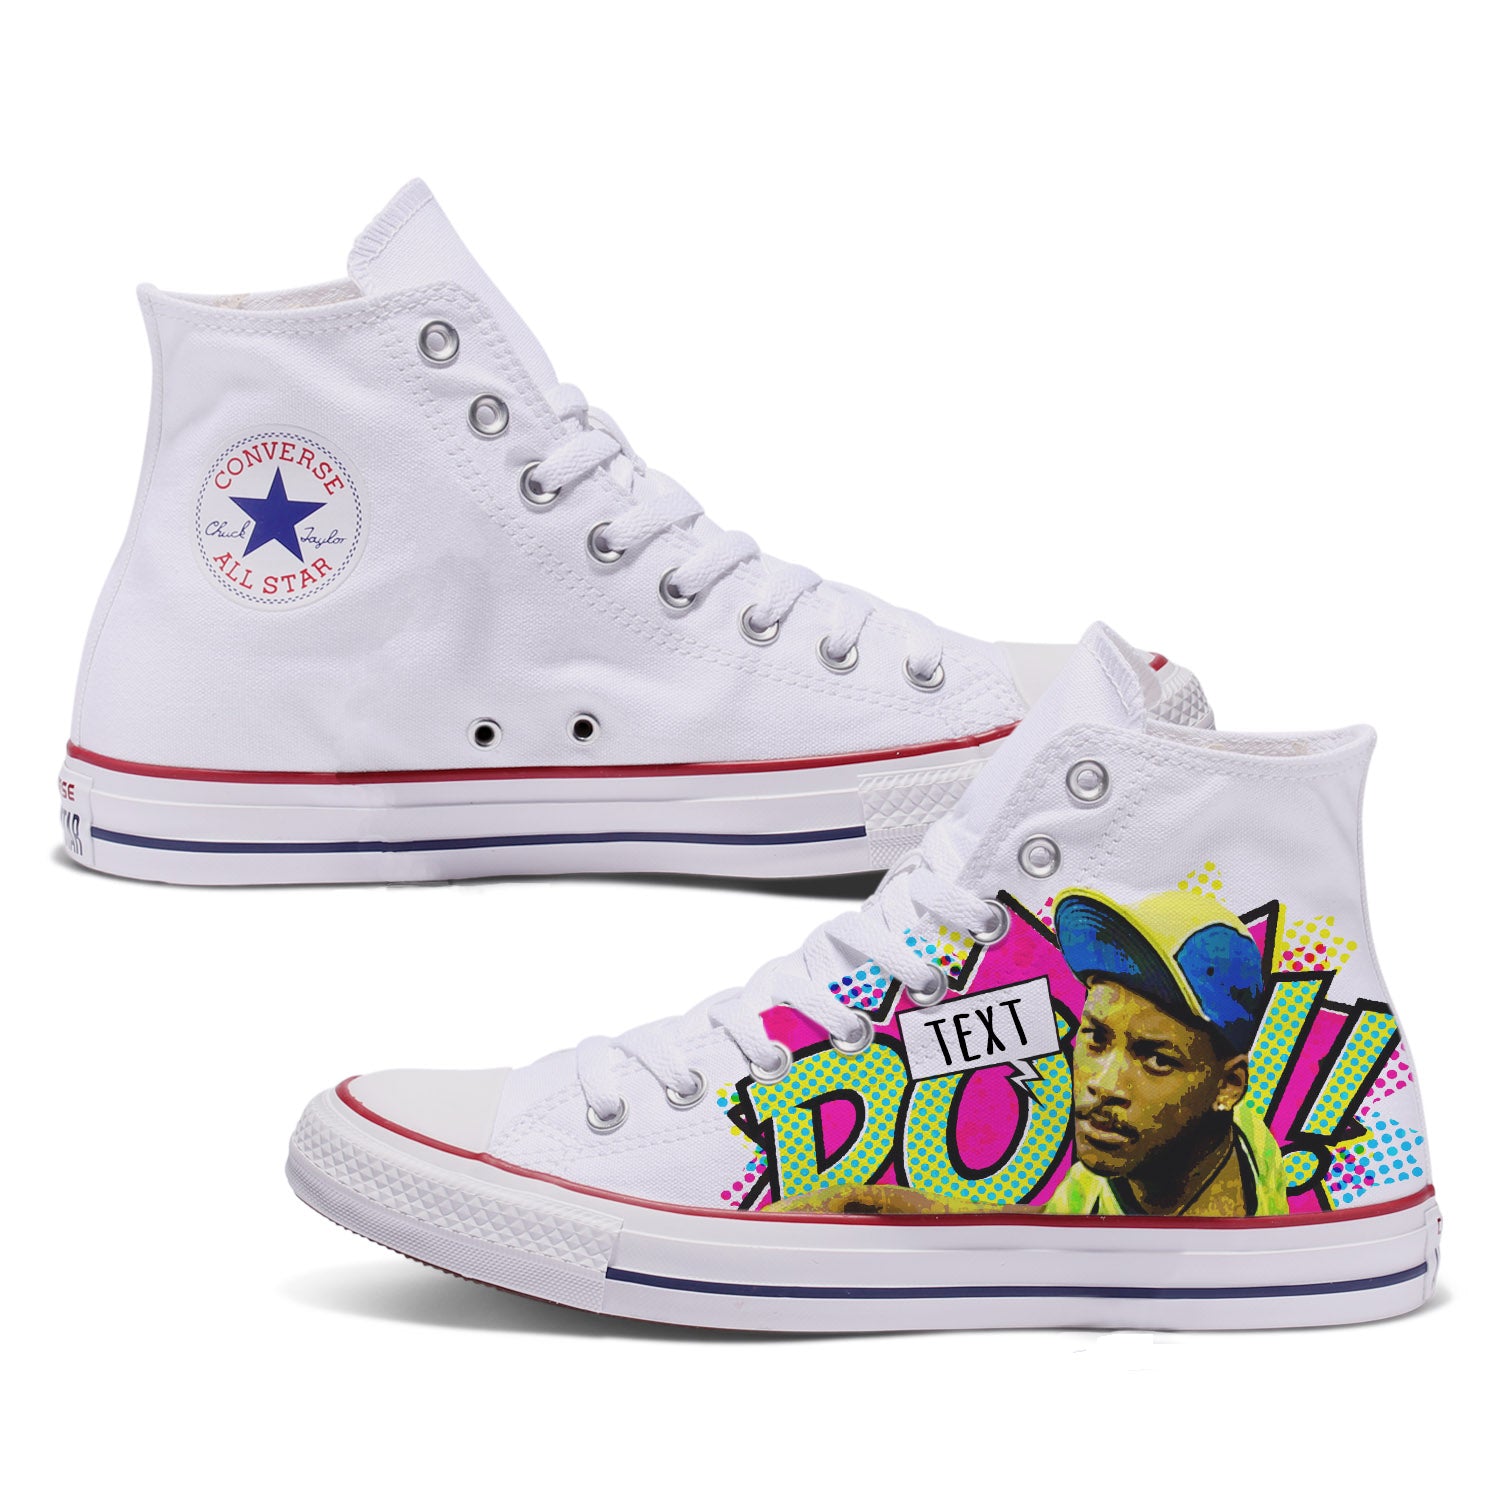 Pearl Jam Guitars Rock and Roll Converse High Top at www..com